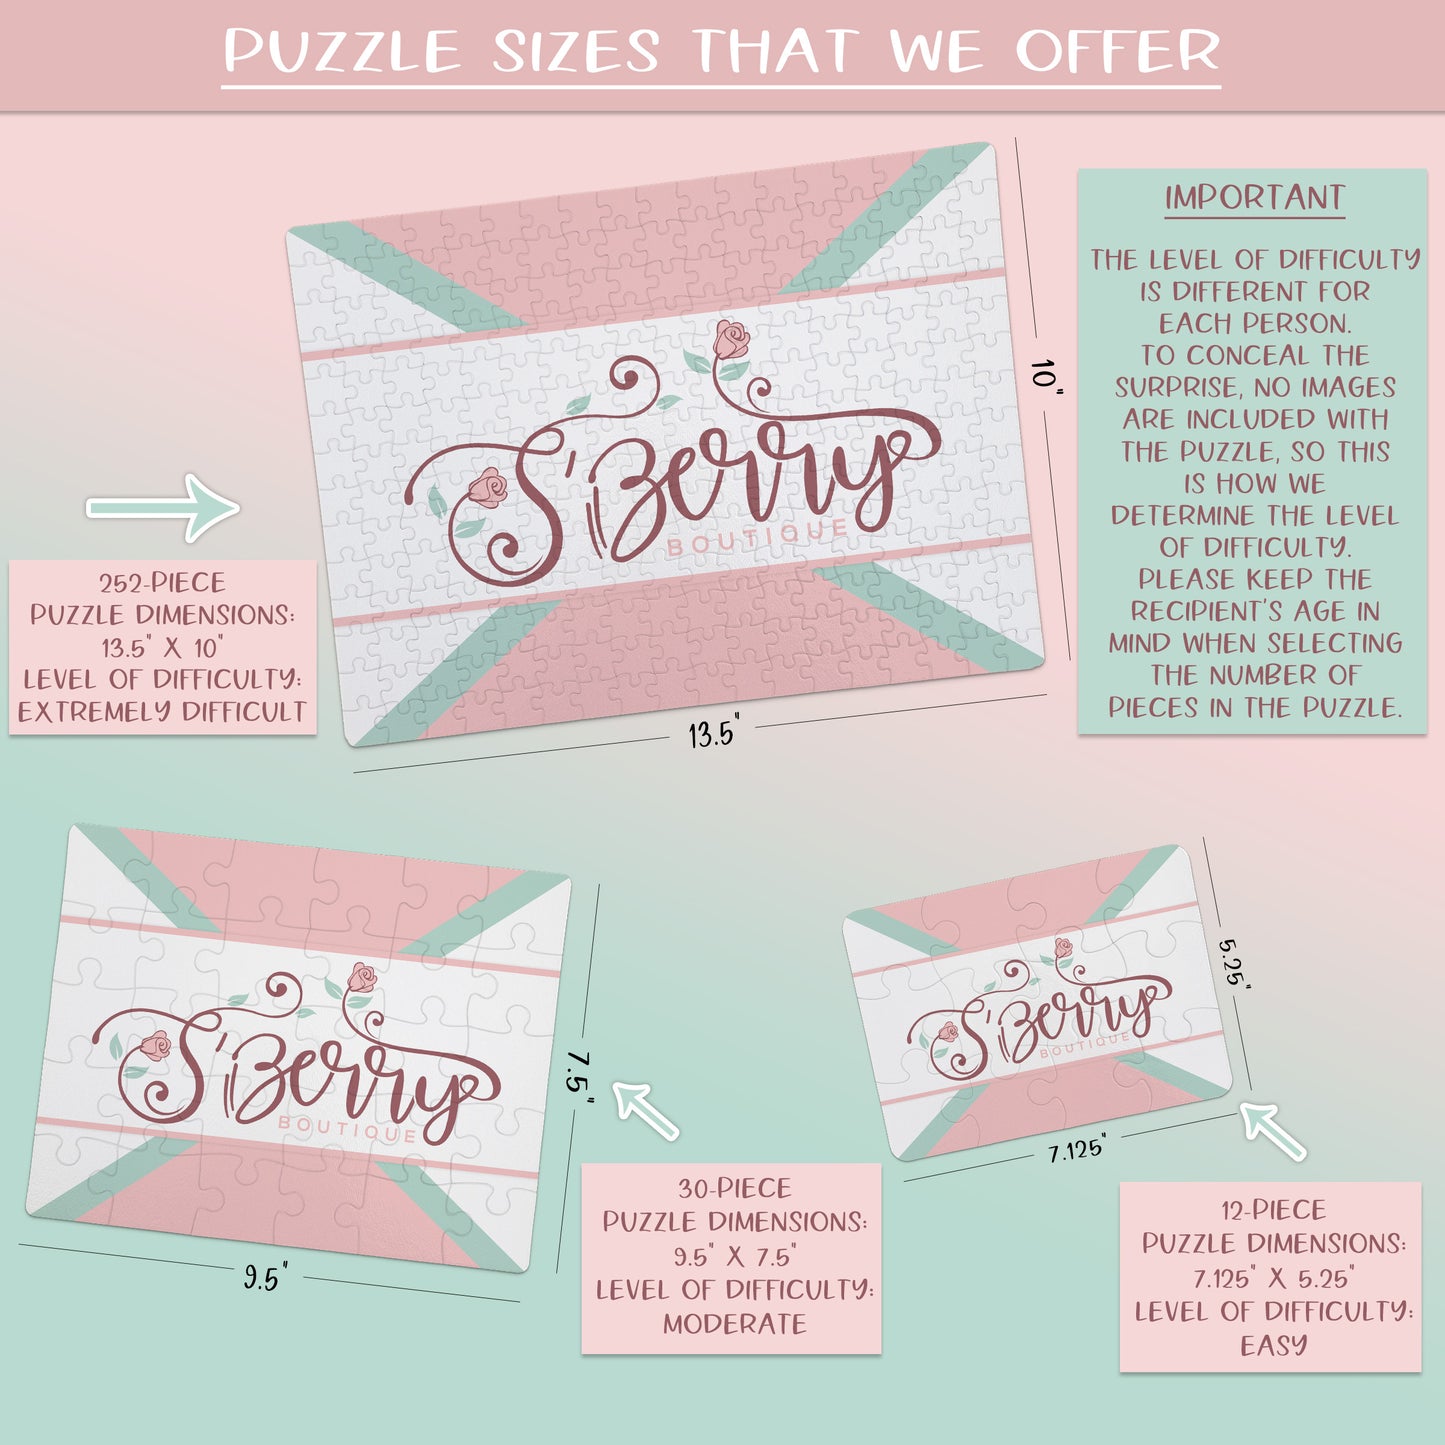 Create Your Own Puzzle - Arrow Design - CYOP0214 | S'Berry Boutique